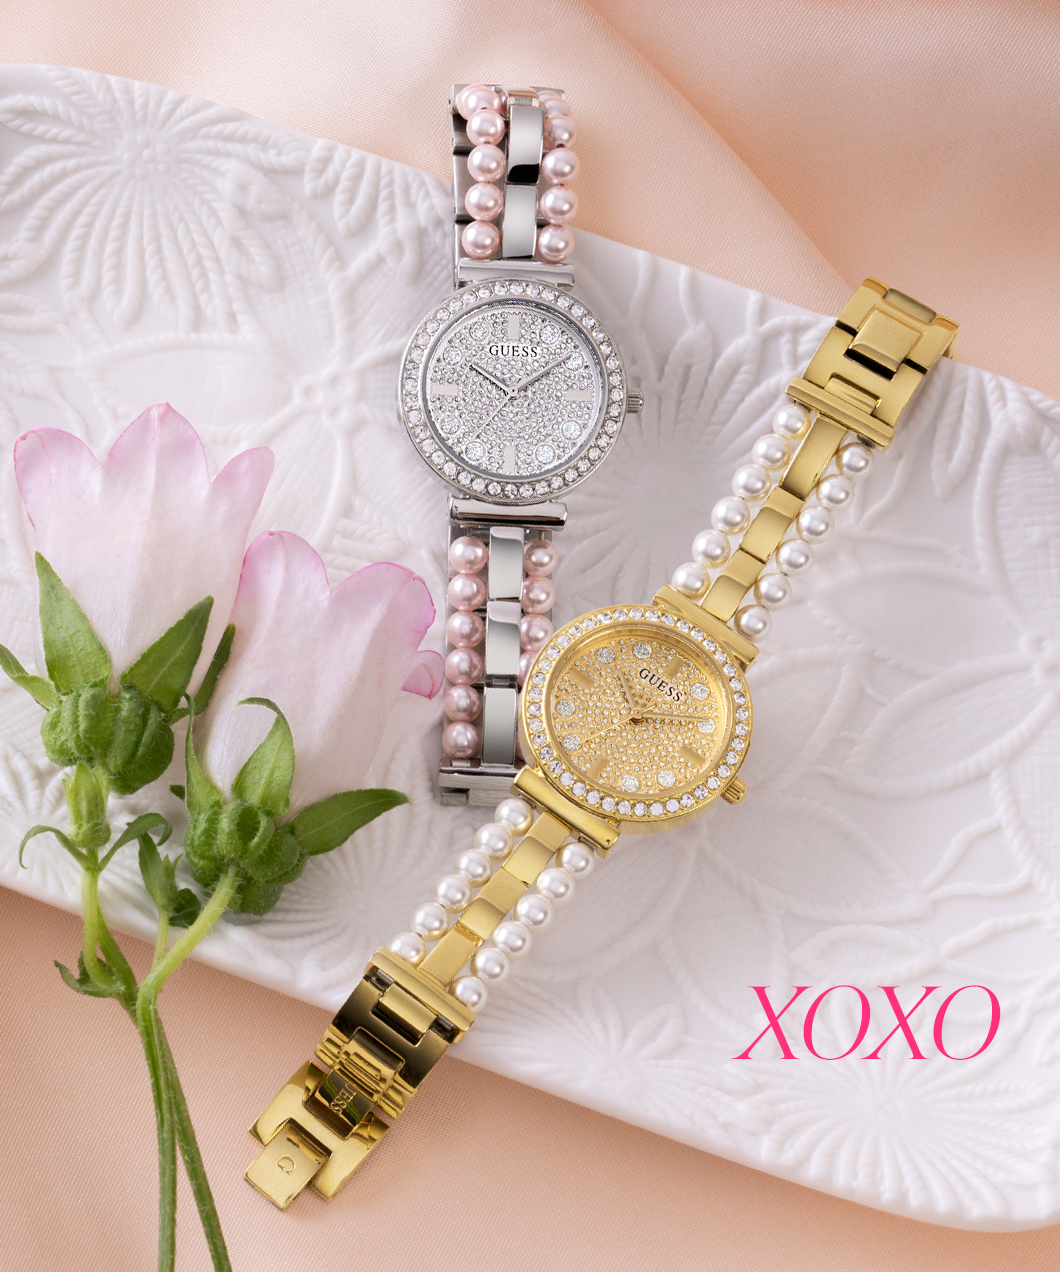 GUESS Watches Valentine's Day Gift Guide